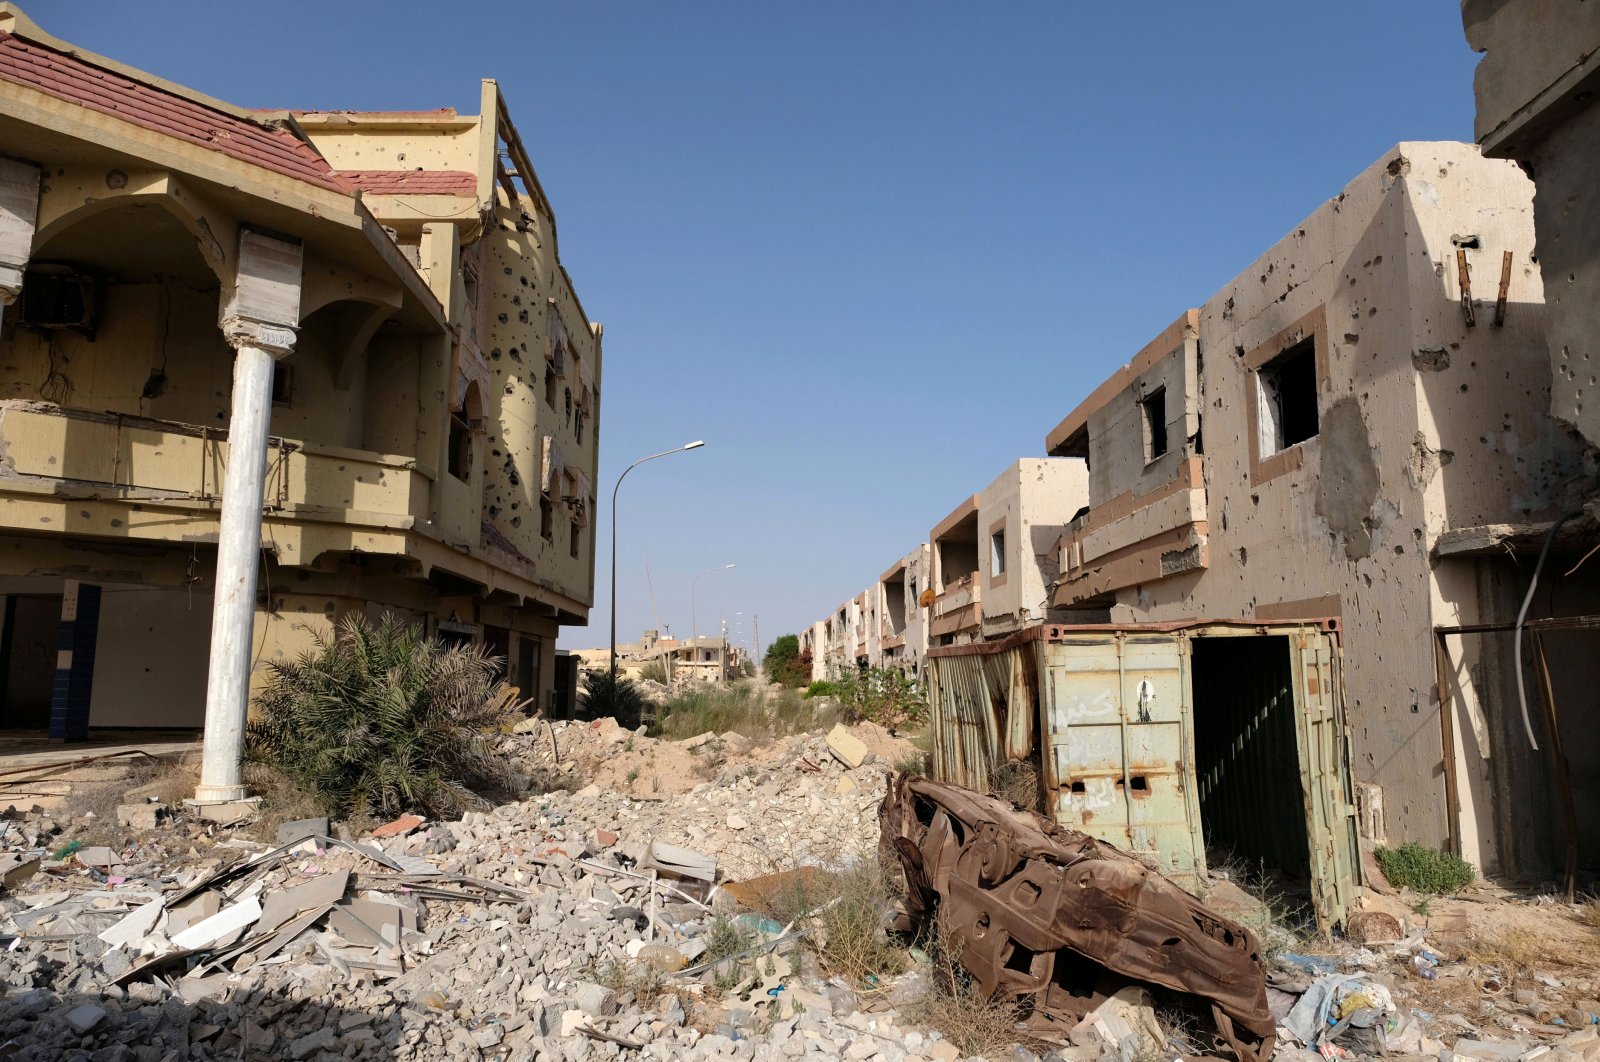 Buildings destroyed during past clashes in Libya's civil war are seen in Sirte, Libya, Aug. 18, 2020. (Reuters Photo)